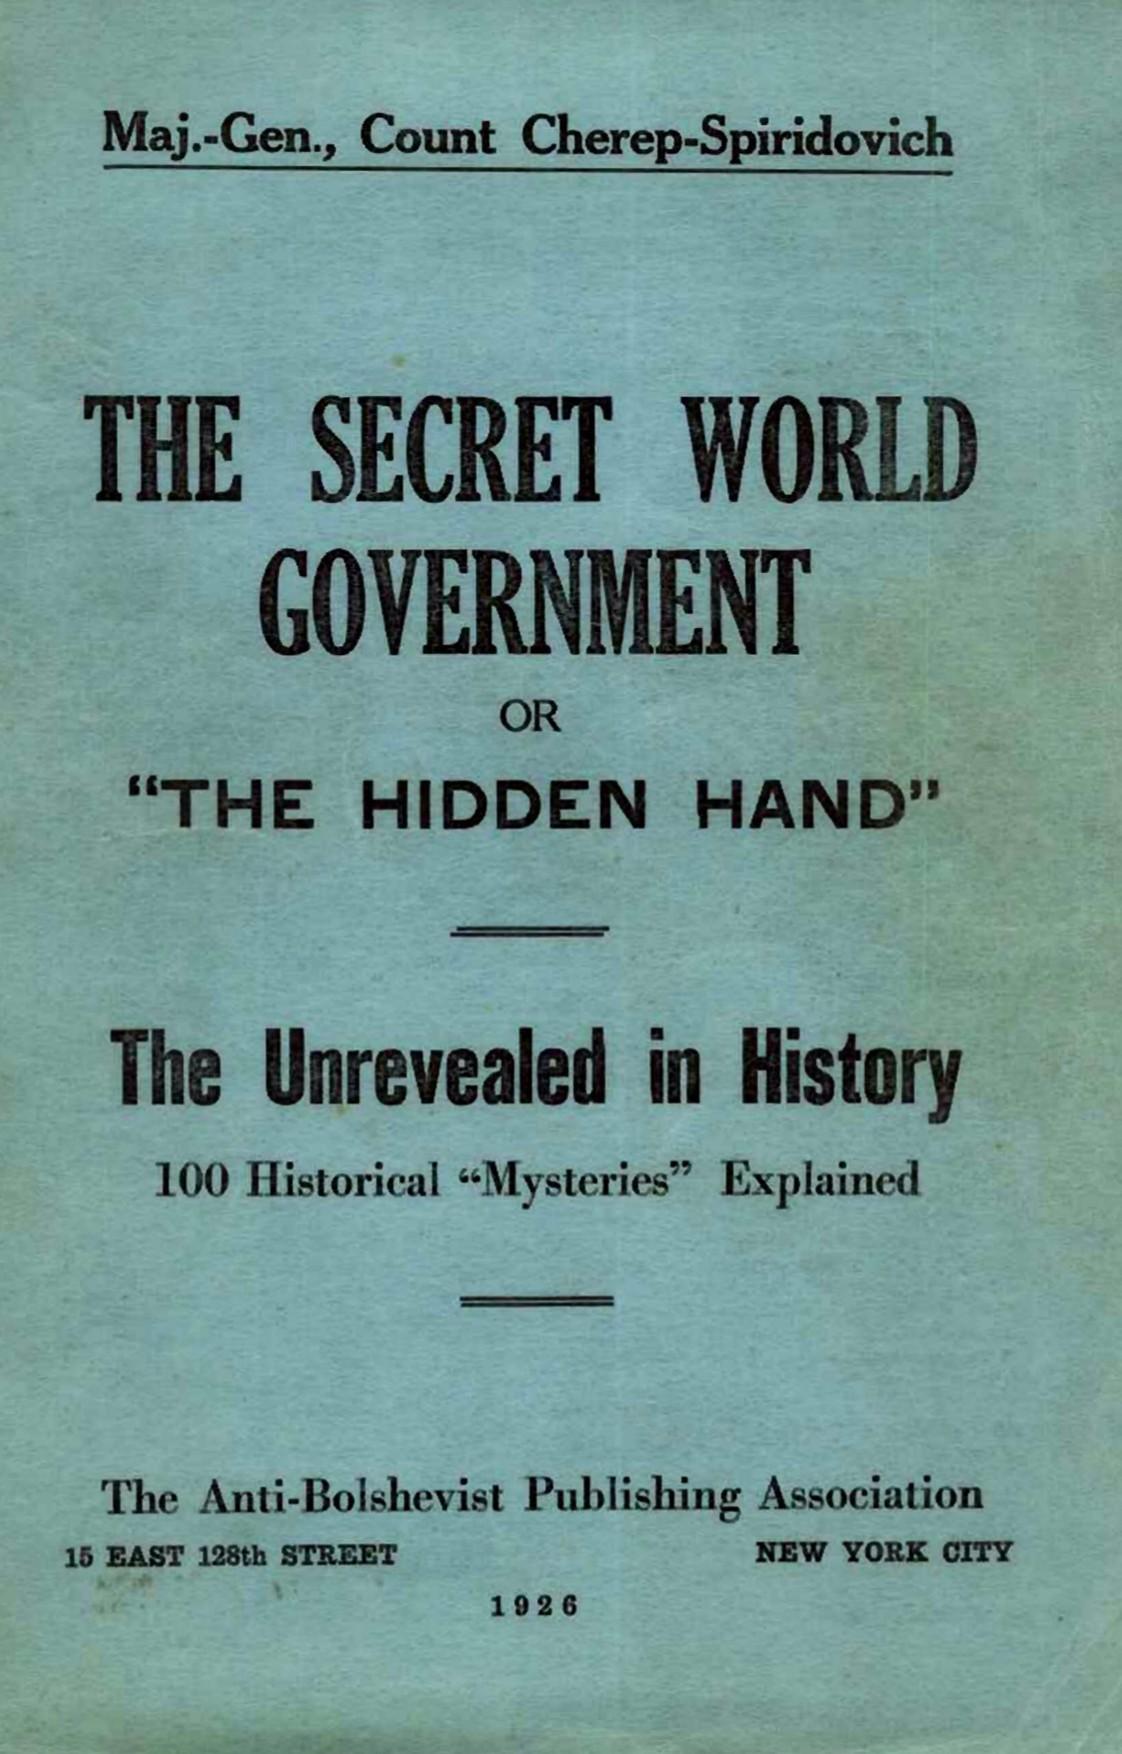 The Secret World Government or "The Hidden Hand": The Unrevealed in History (1925) by Count Cherep-Spriridovich